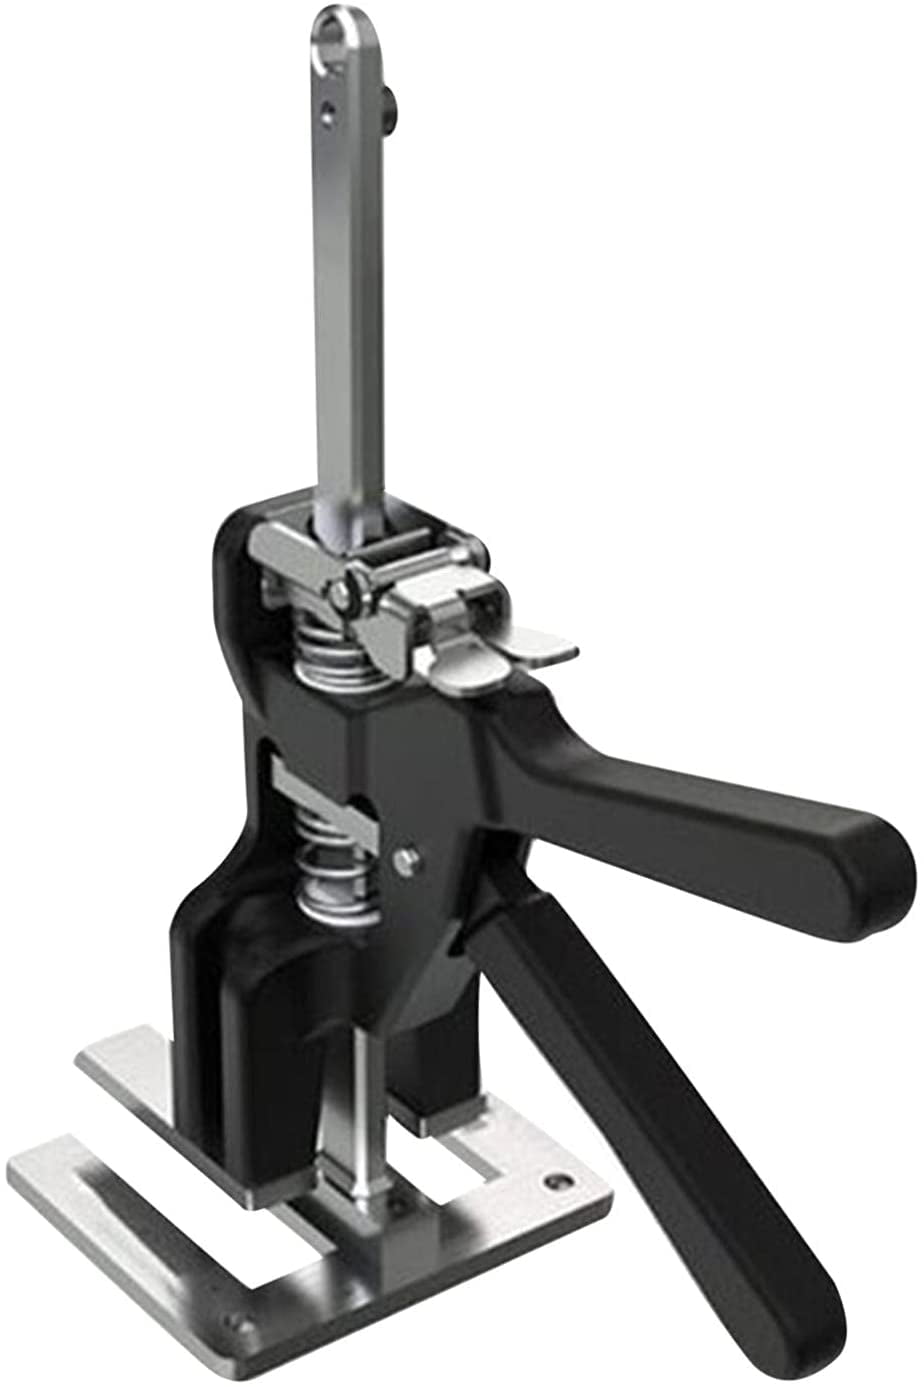 Window Tile Adjustment and Lifting Device Stainless Steel Arm Leveling Lifter Viking Arm Handheld Jack Deck Installation Jack Arm Handheld Labor-Saving Arm for Doors A Cabinet,Flooring